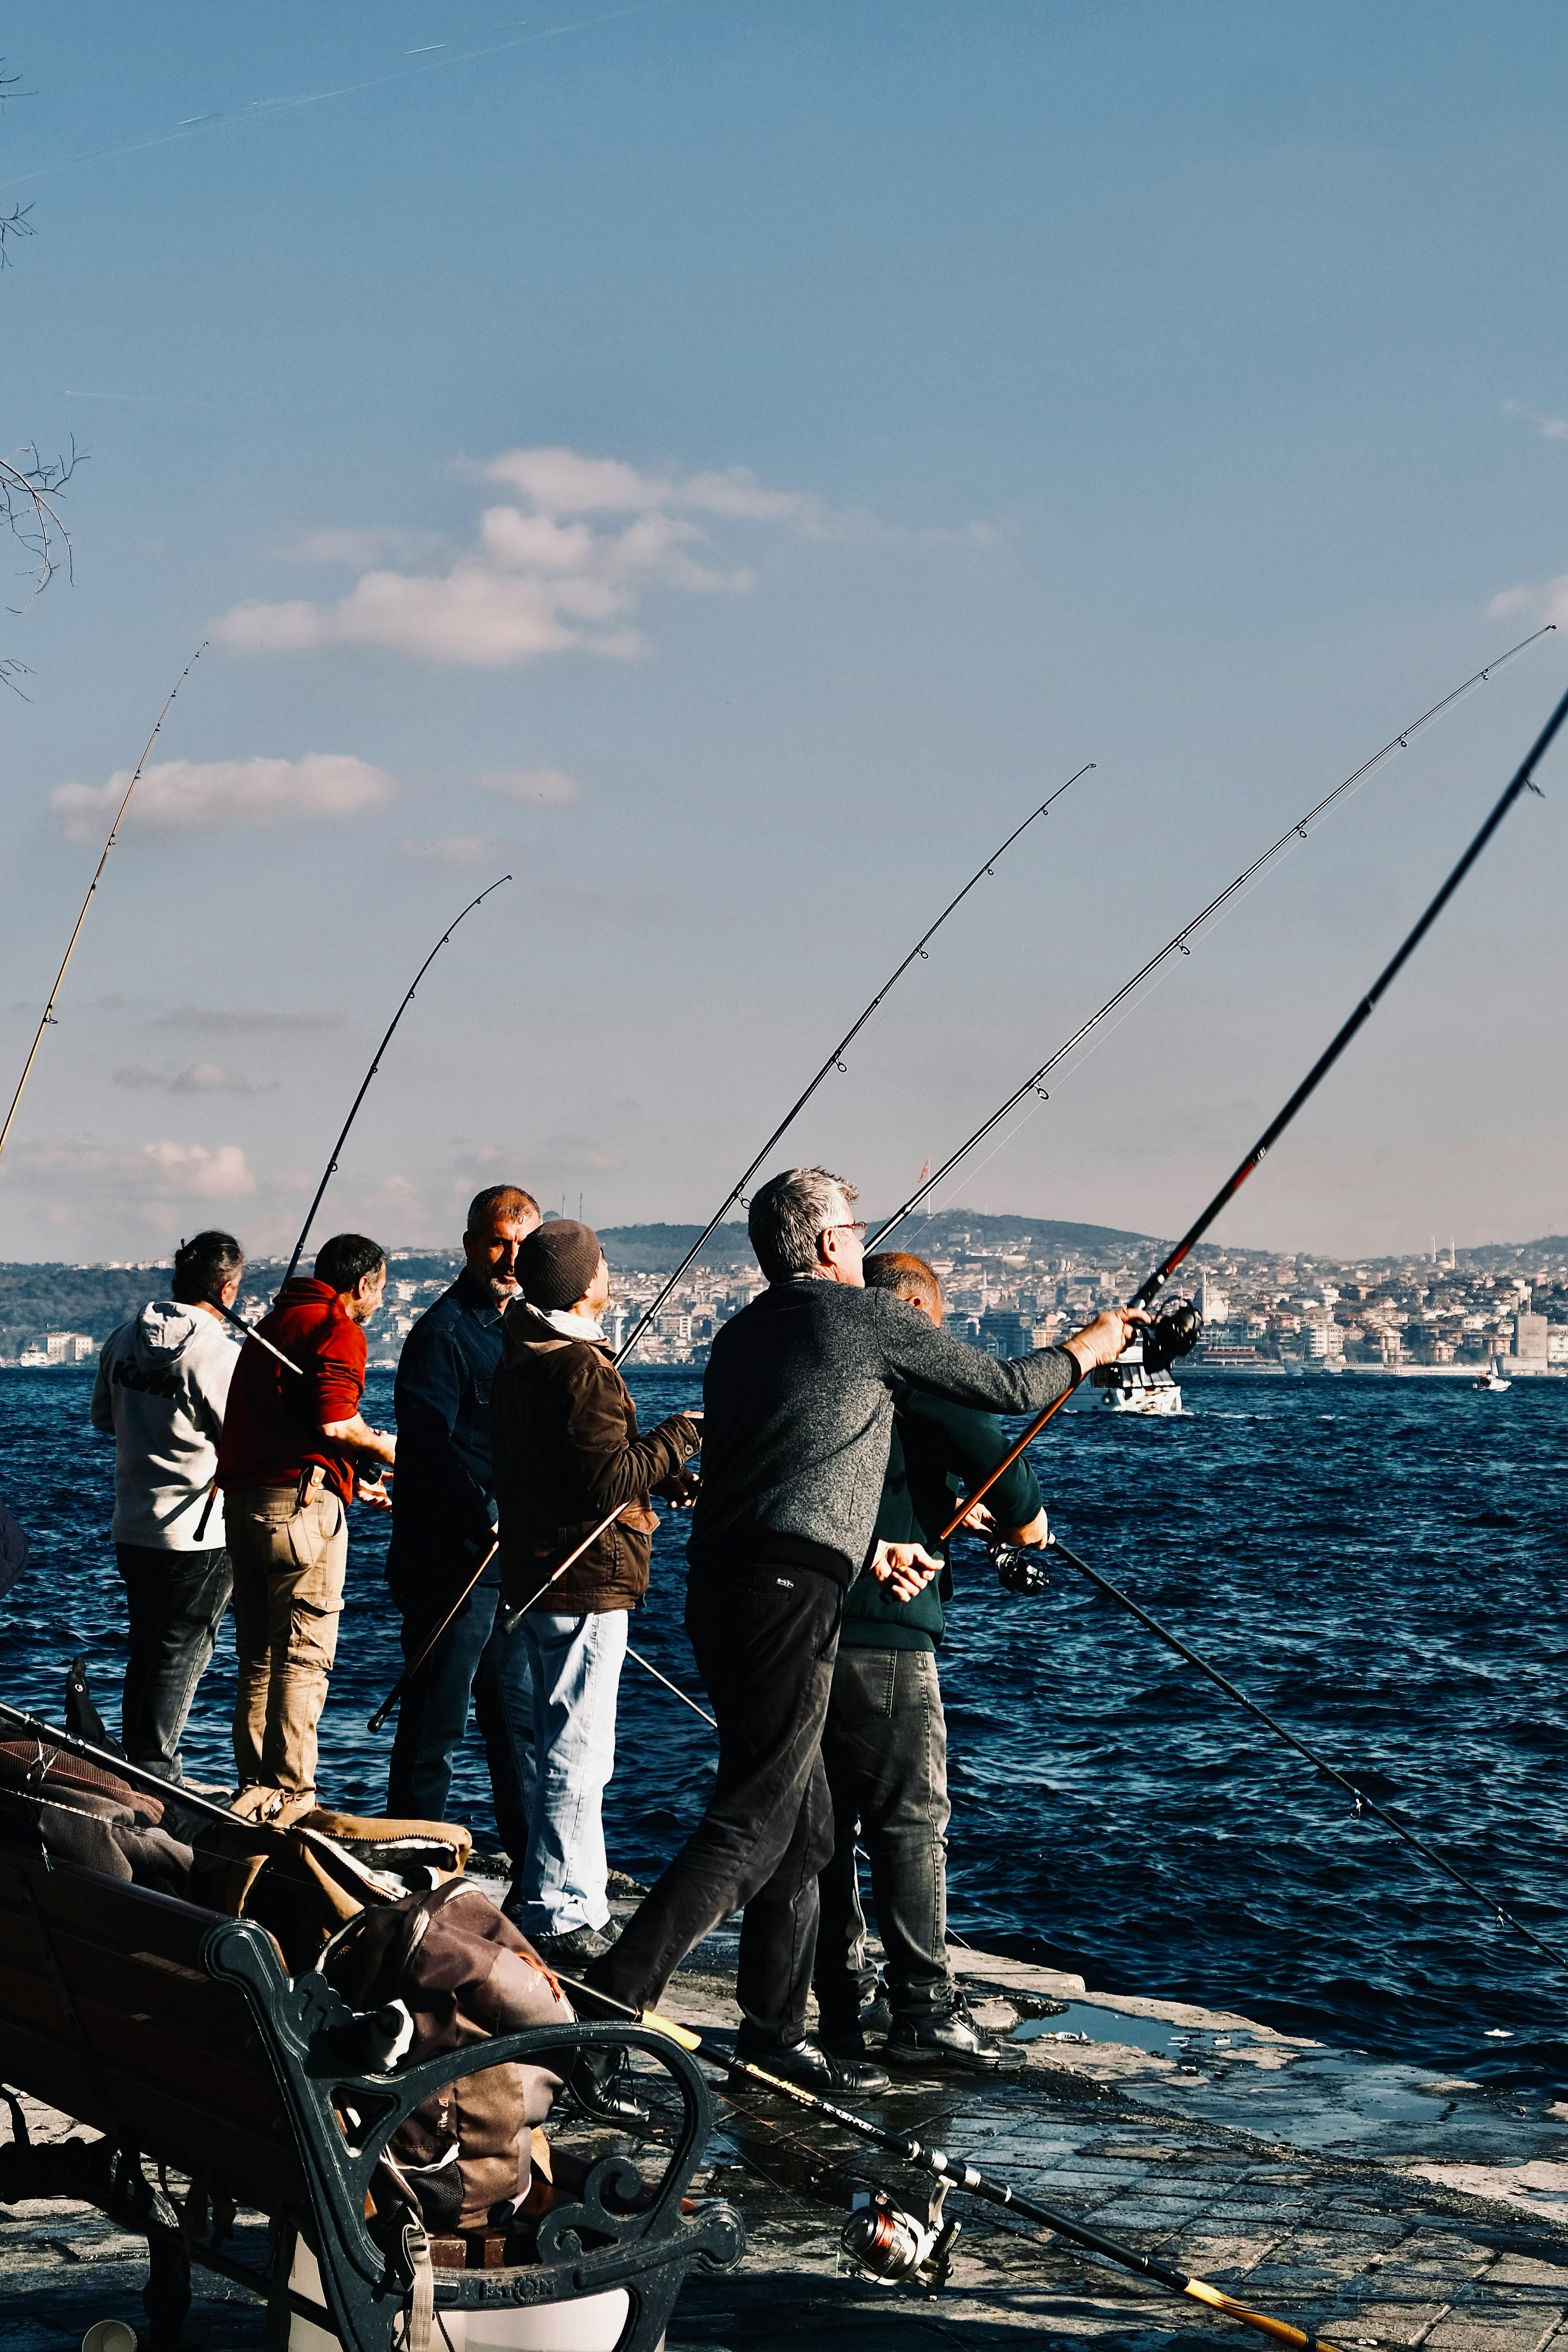 Men with Fishing Rods in Bay · Free Stock Photo